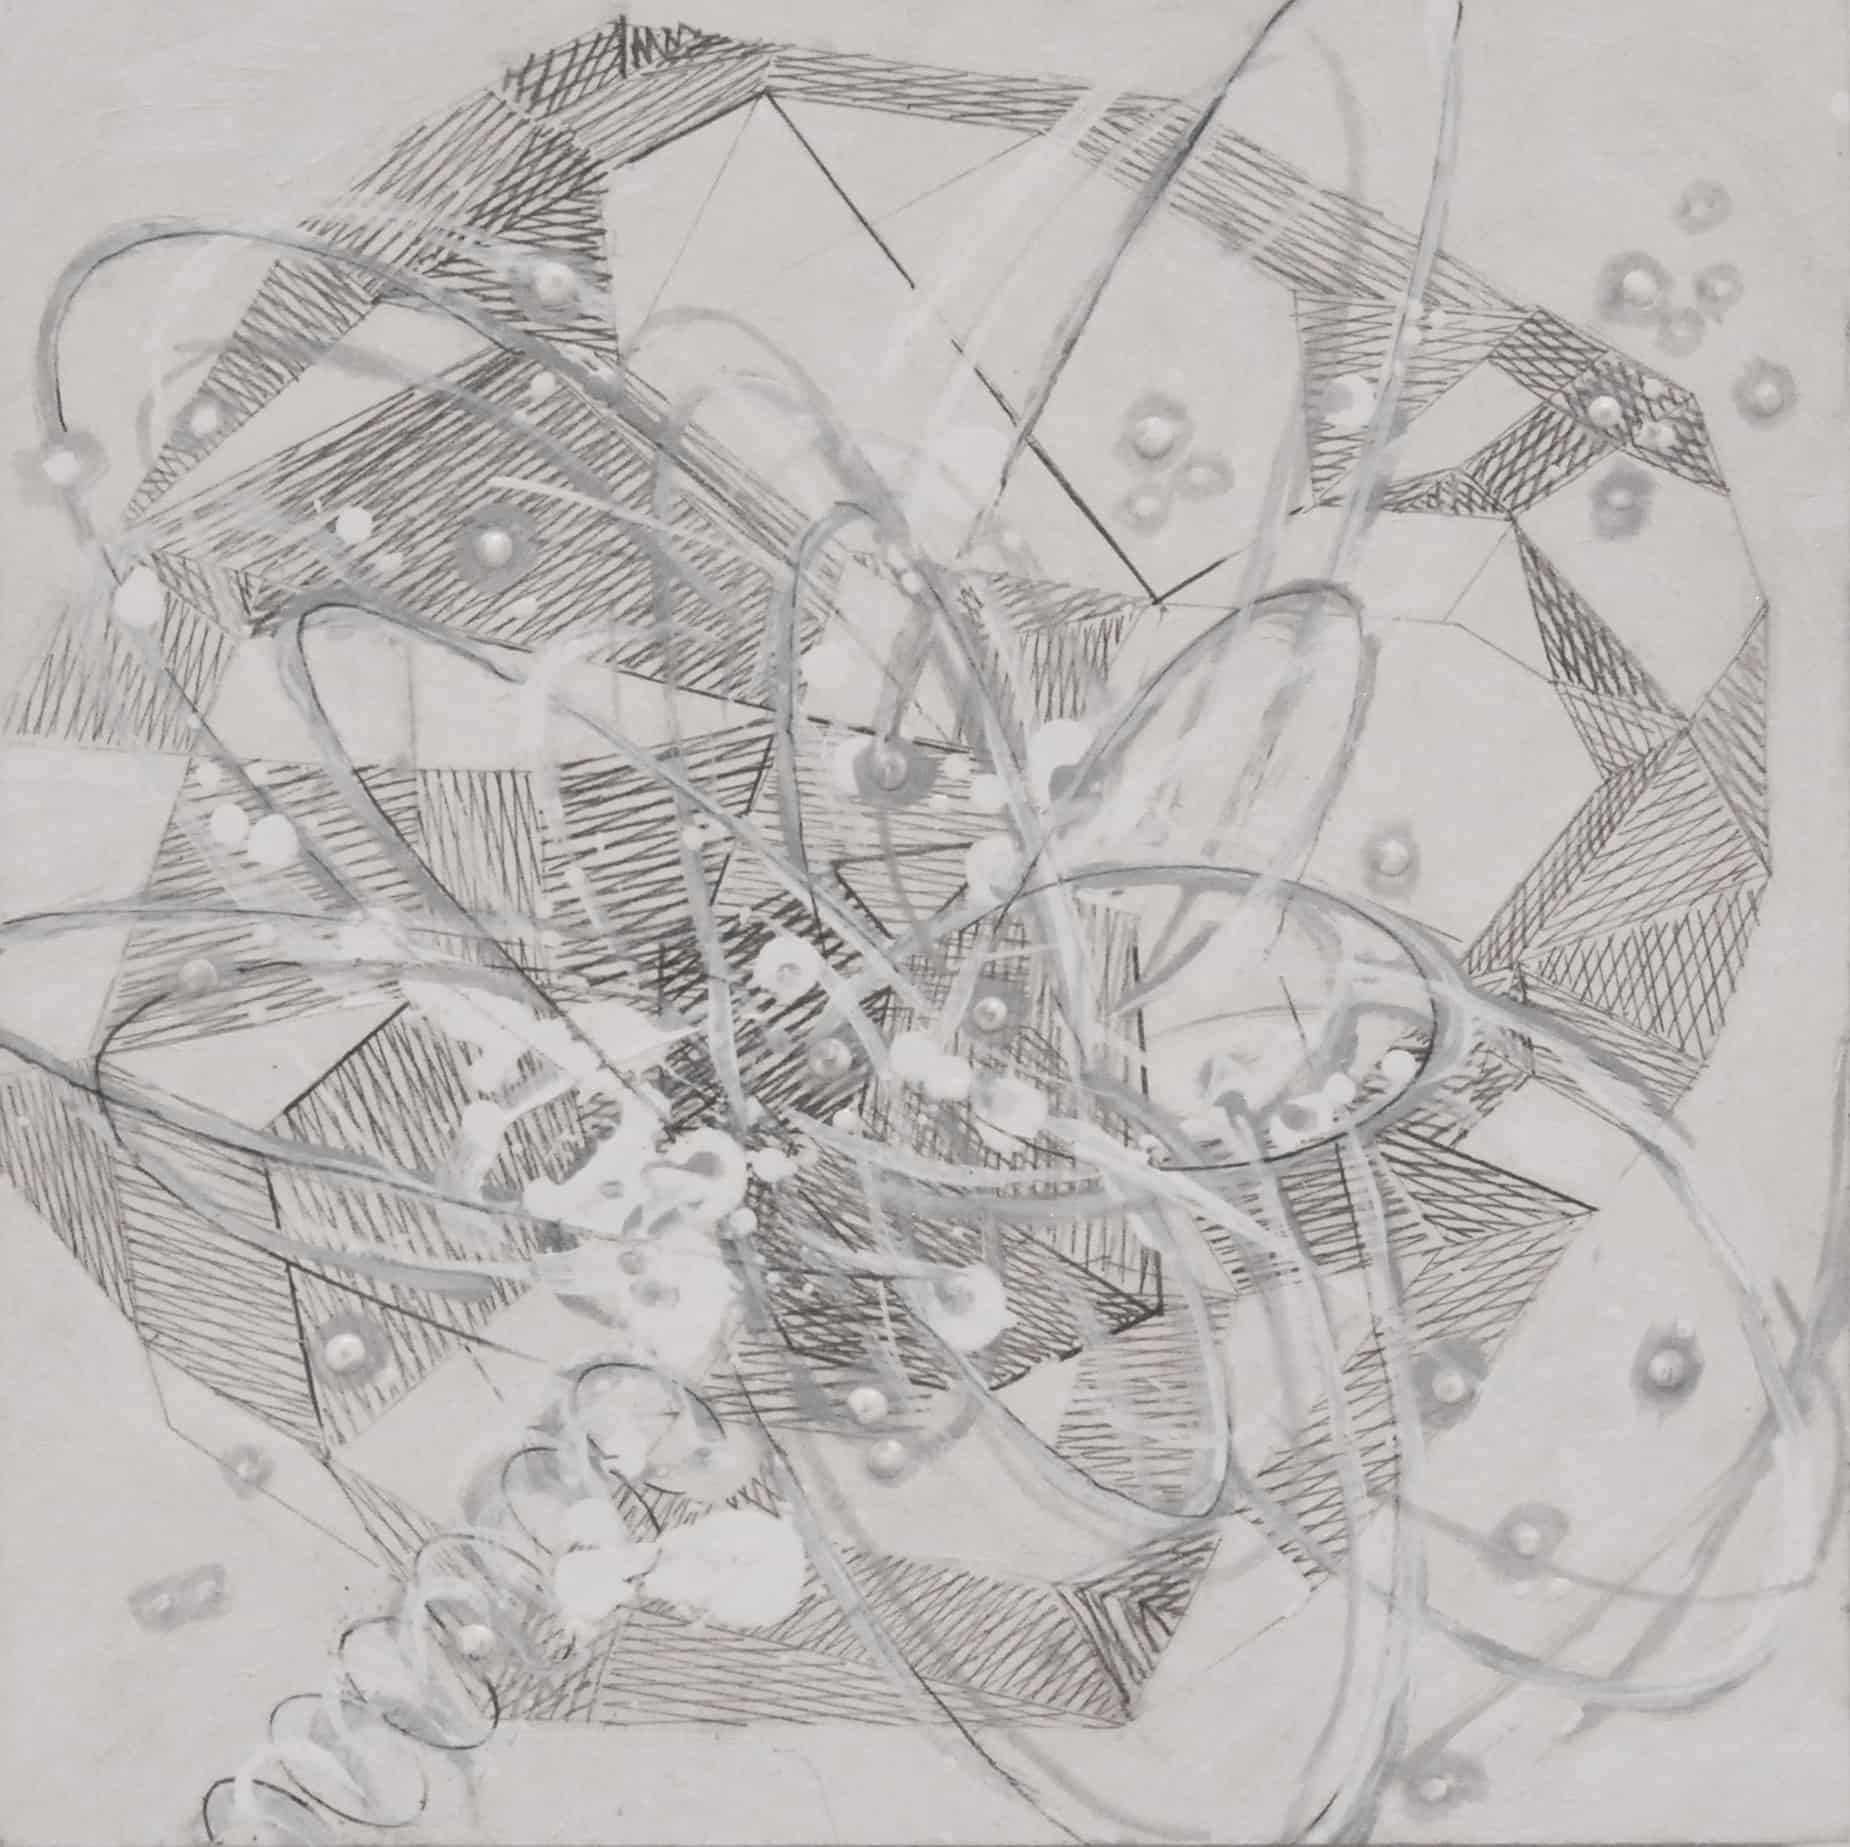 Roundabout Orbit, painting from Tesseract Study 21-F-06, 2021, graphite pencil & oil on board (black frame), 8 x 8